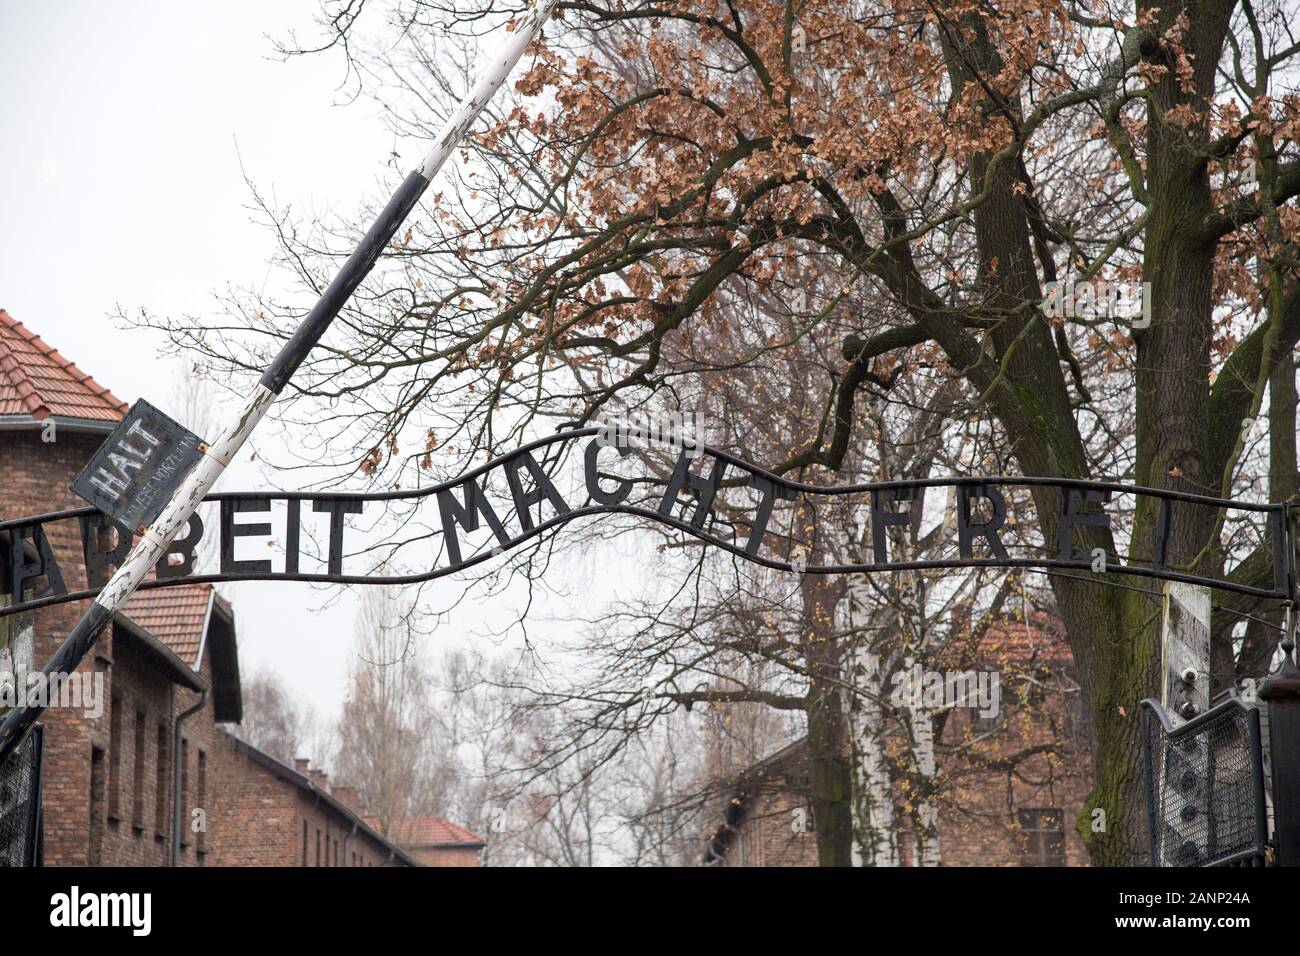 Arbeit macht frei sign (in German Work sets you free) main gate to Nazi German Konzentrationslager Auschwitz I Stammlager (Auschwitz I concentration c Stock Photo